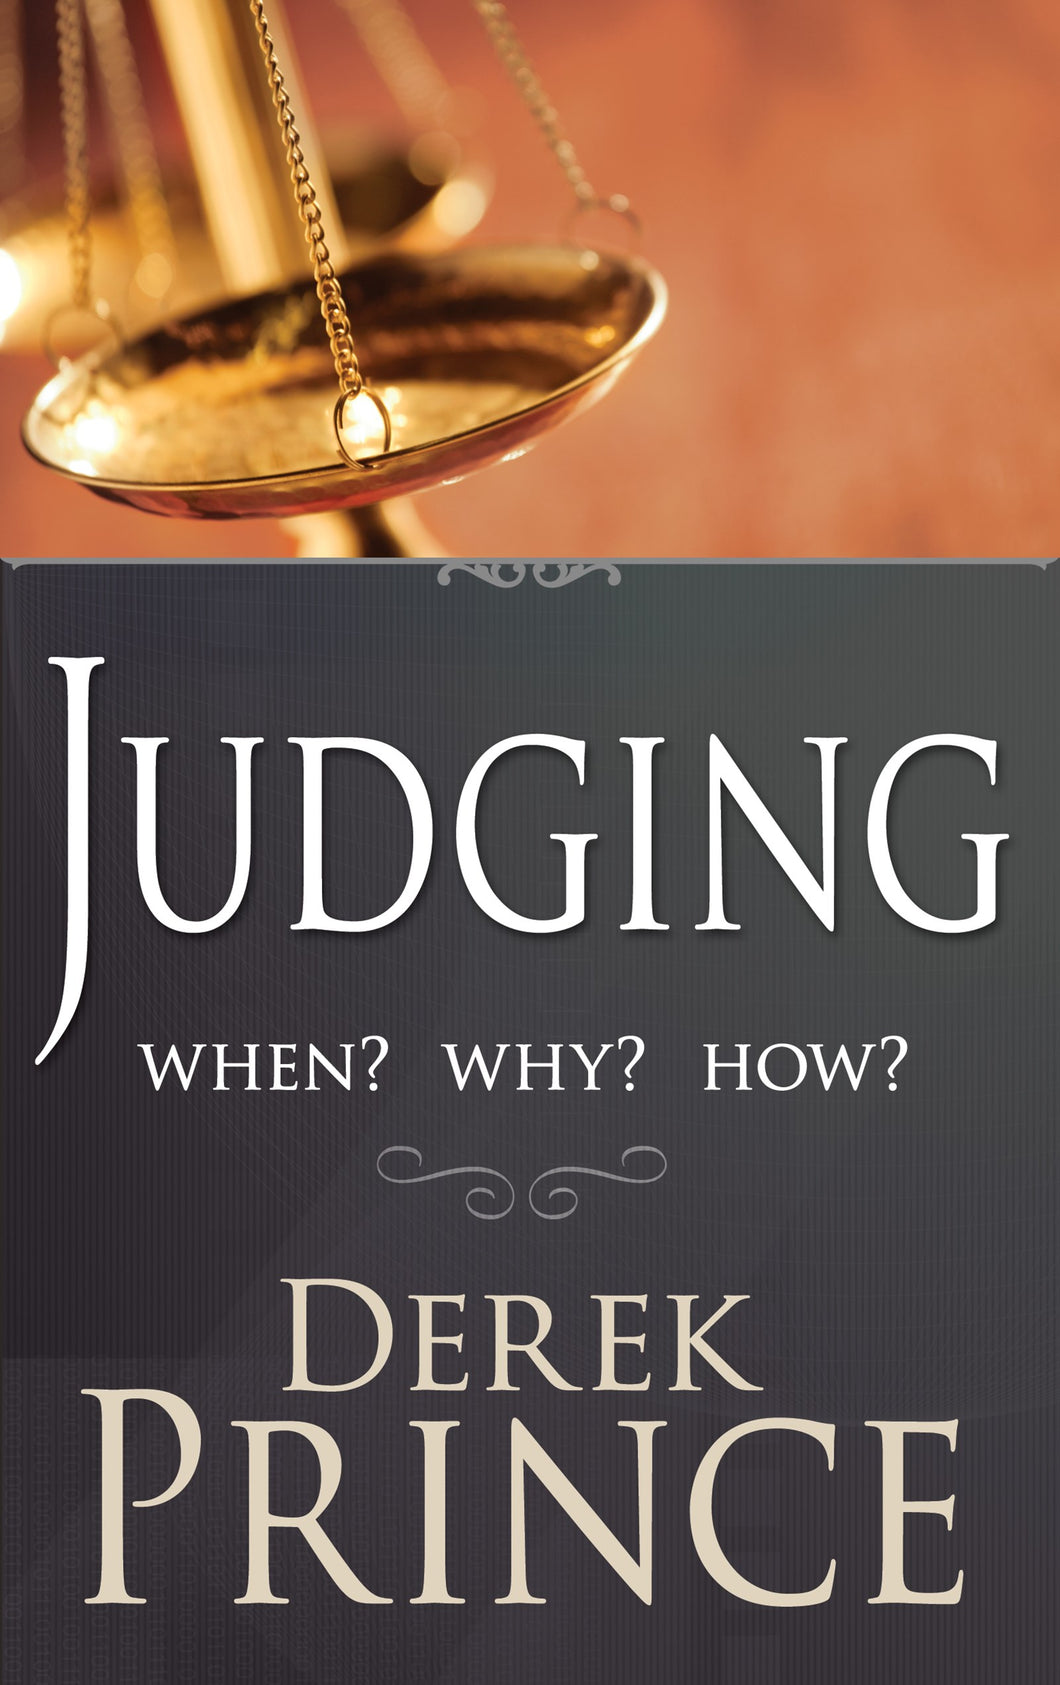 Judging: When? Why? How?